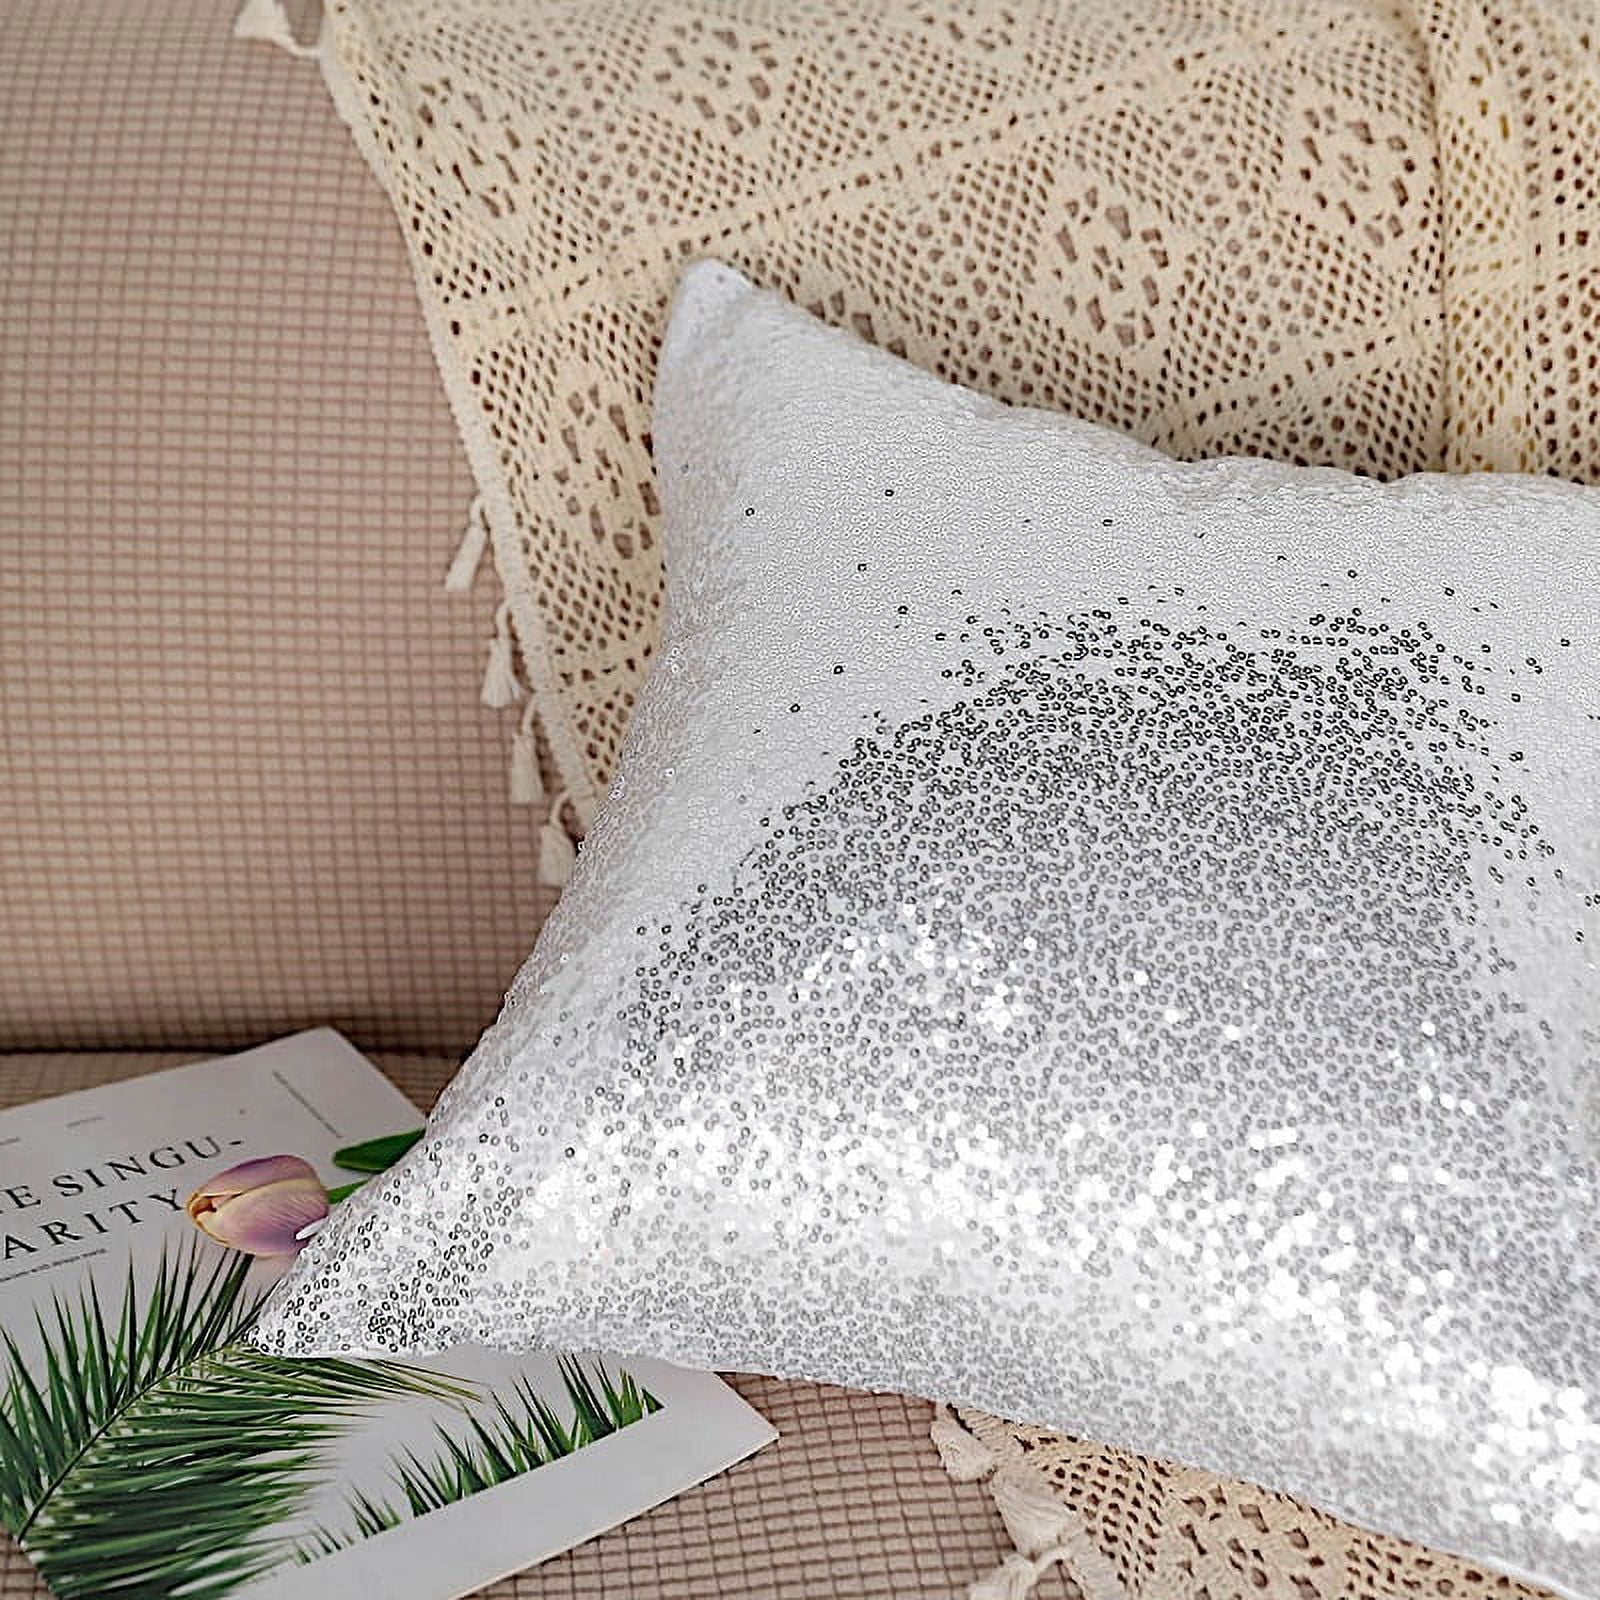 Balsacircle 2 Silver 18x18 inch Decorations Throw Pillow Covers Square Sequin Cushion Cases Living Room Couch Sofa